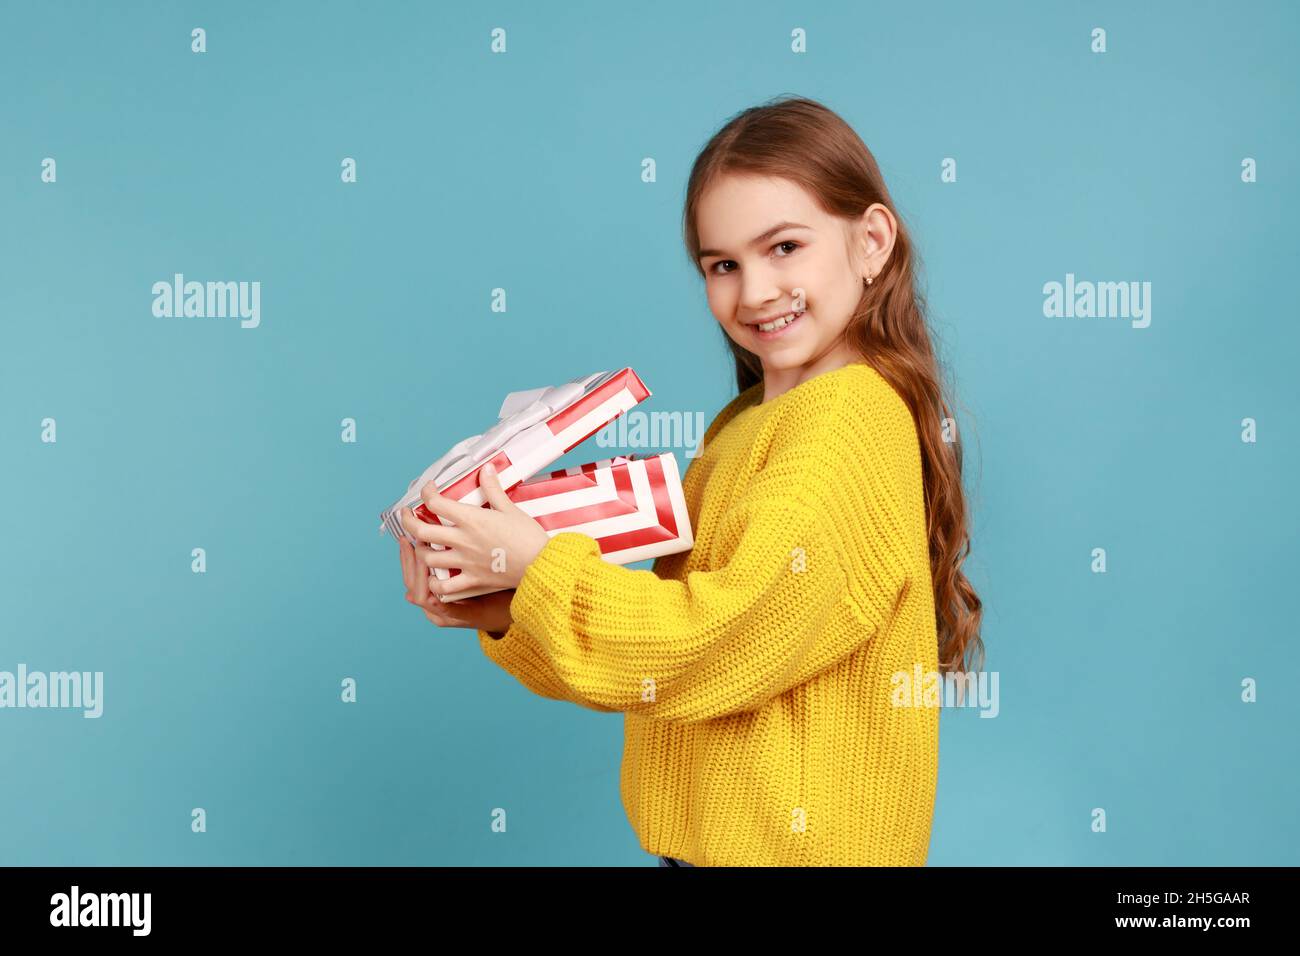 Side view of little girl opens gift box, smiling to camera, celebrating birthday, Christmas holiday, wearing yellow casual style sweater. Indoor studio shot isolated on blue background. Stock Photo